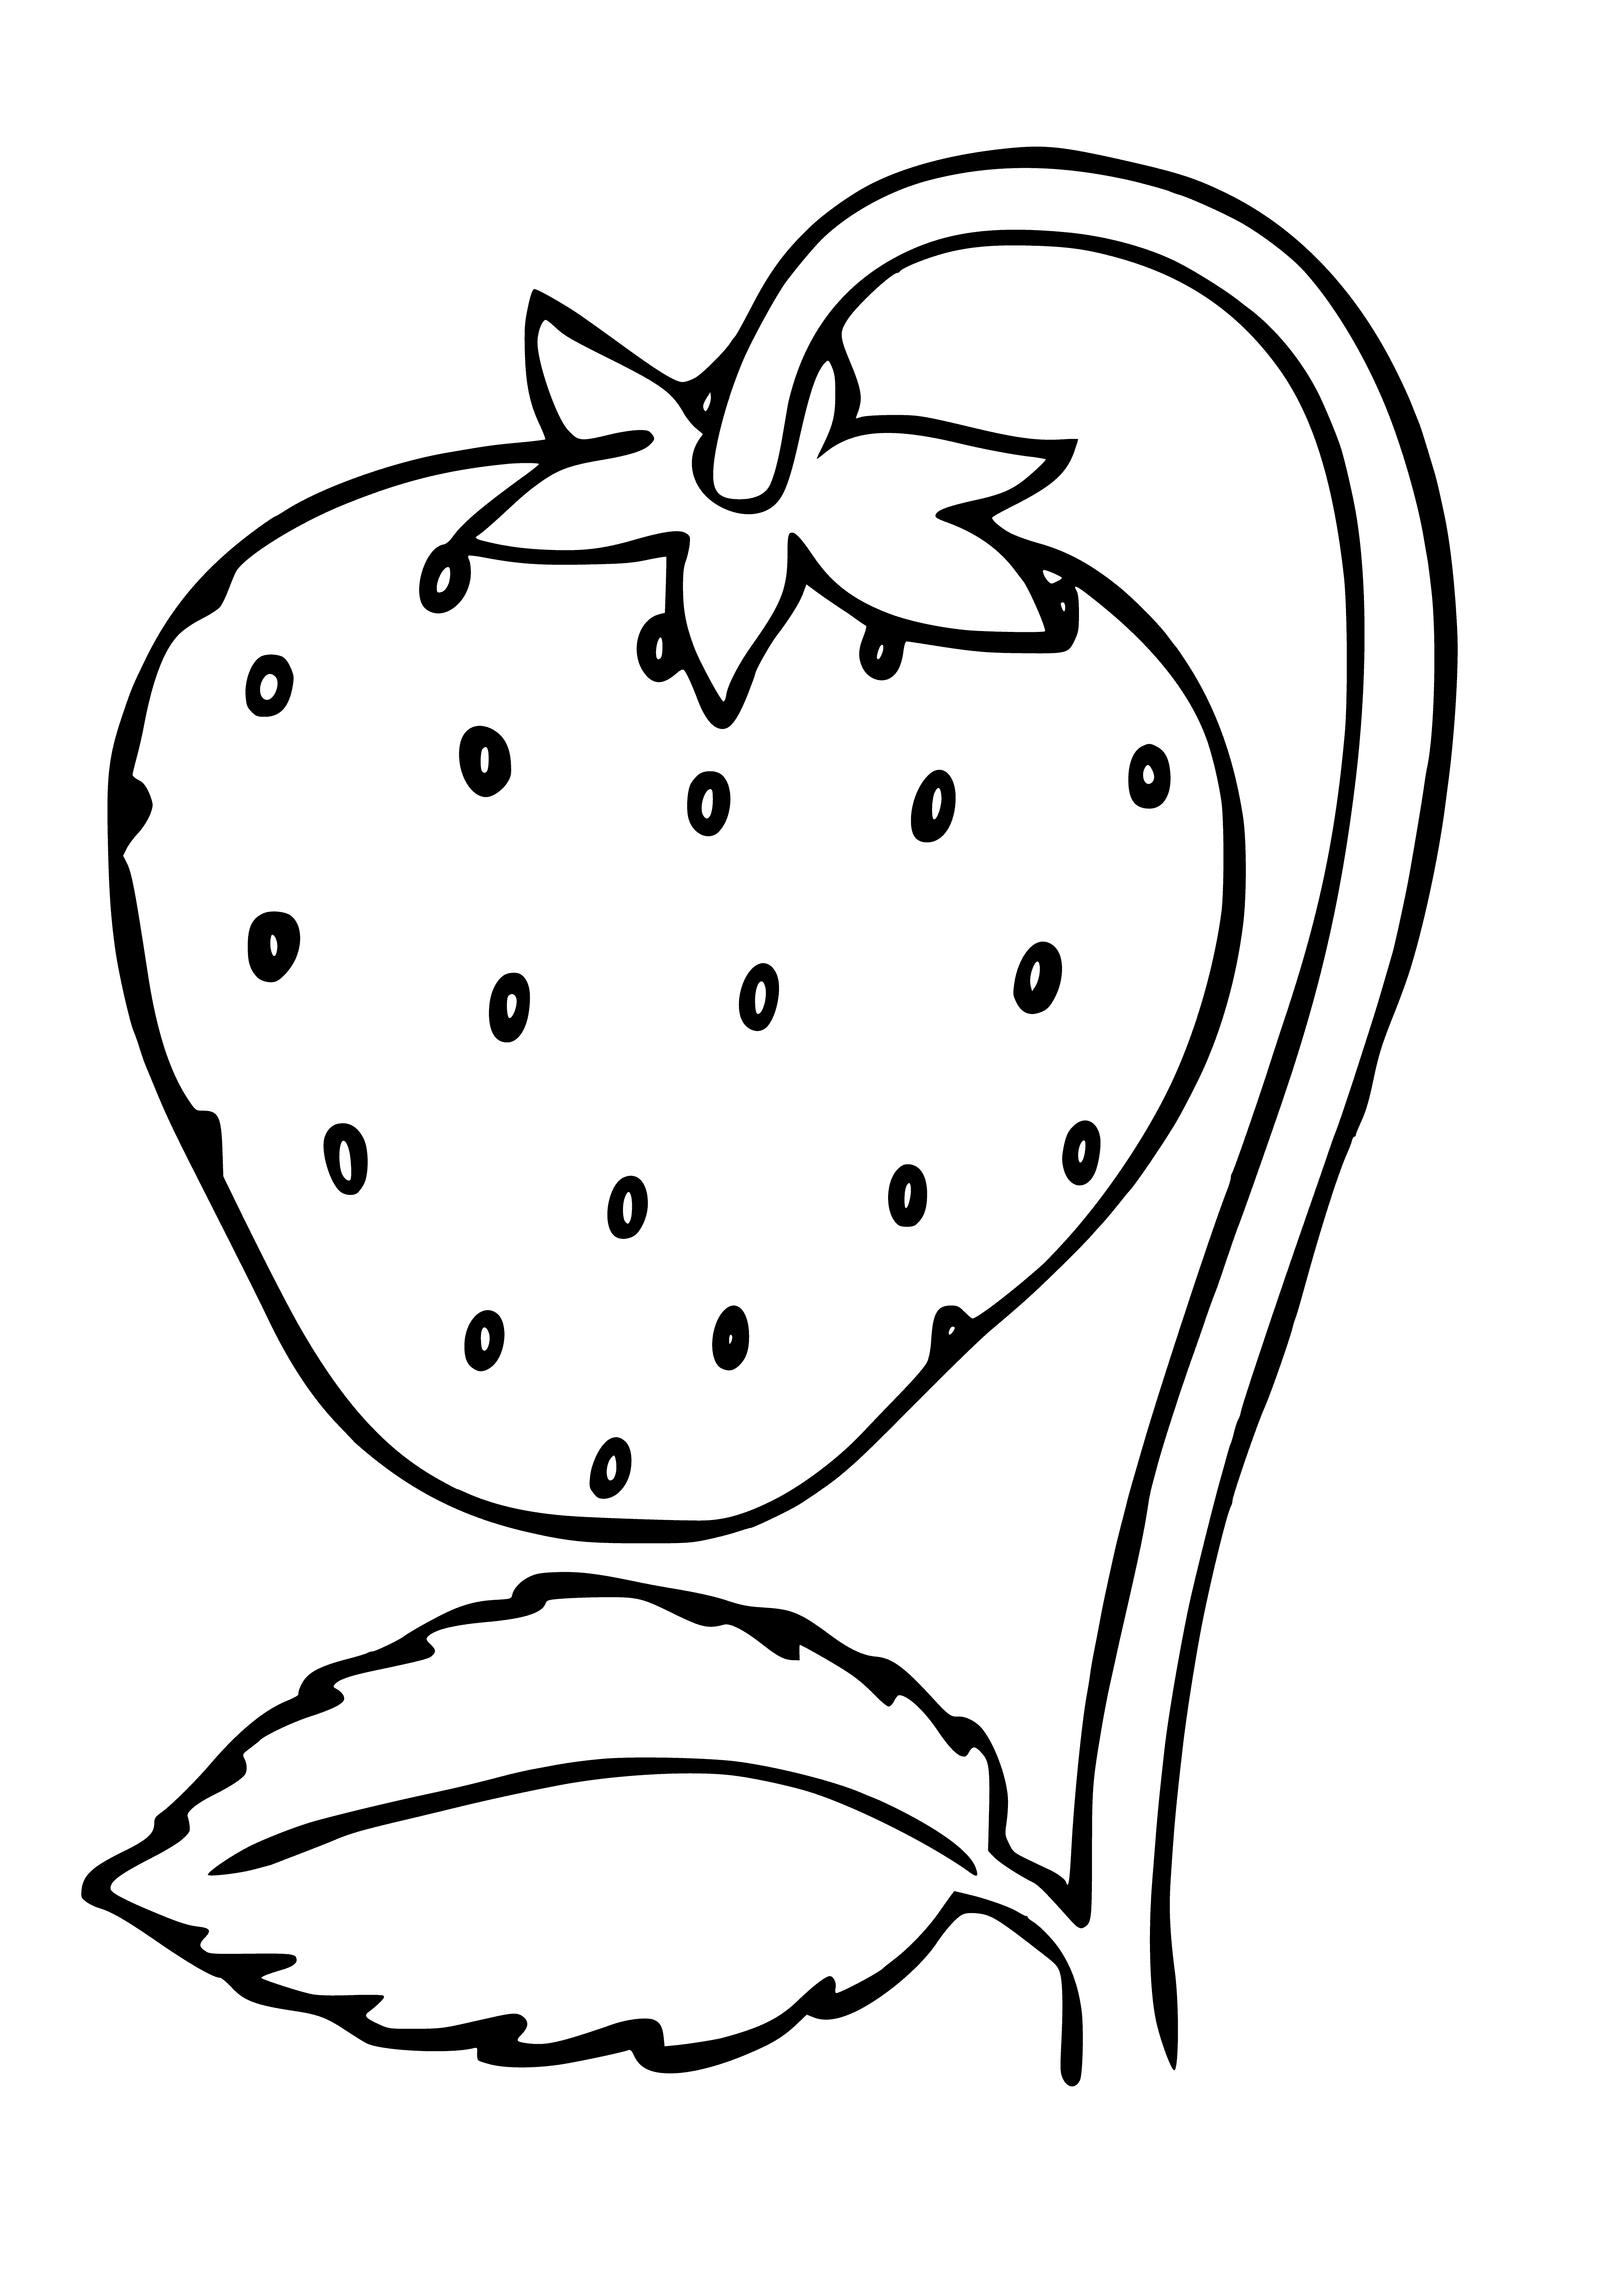 coloring page: A red strawberry with green leaves.